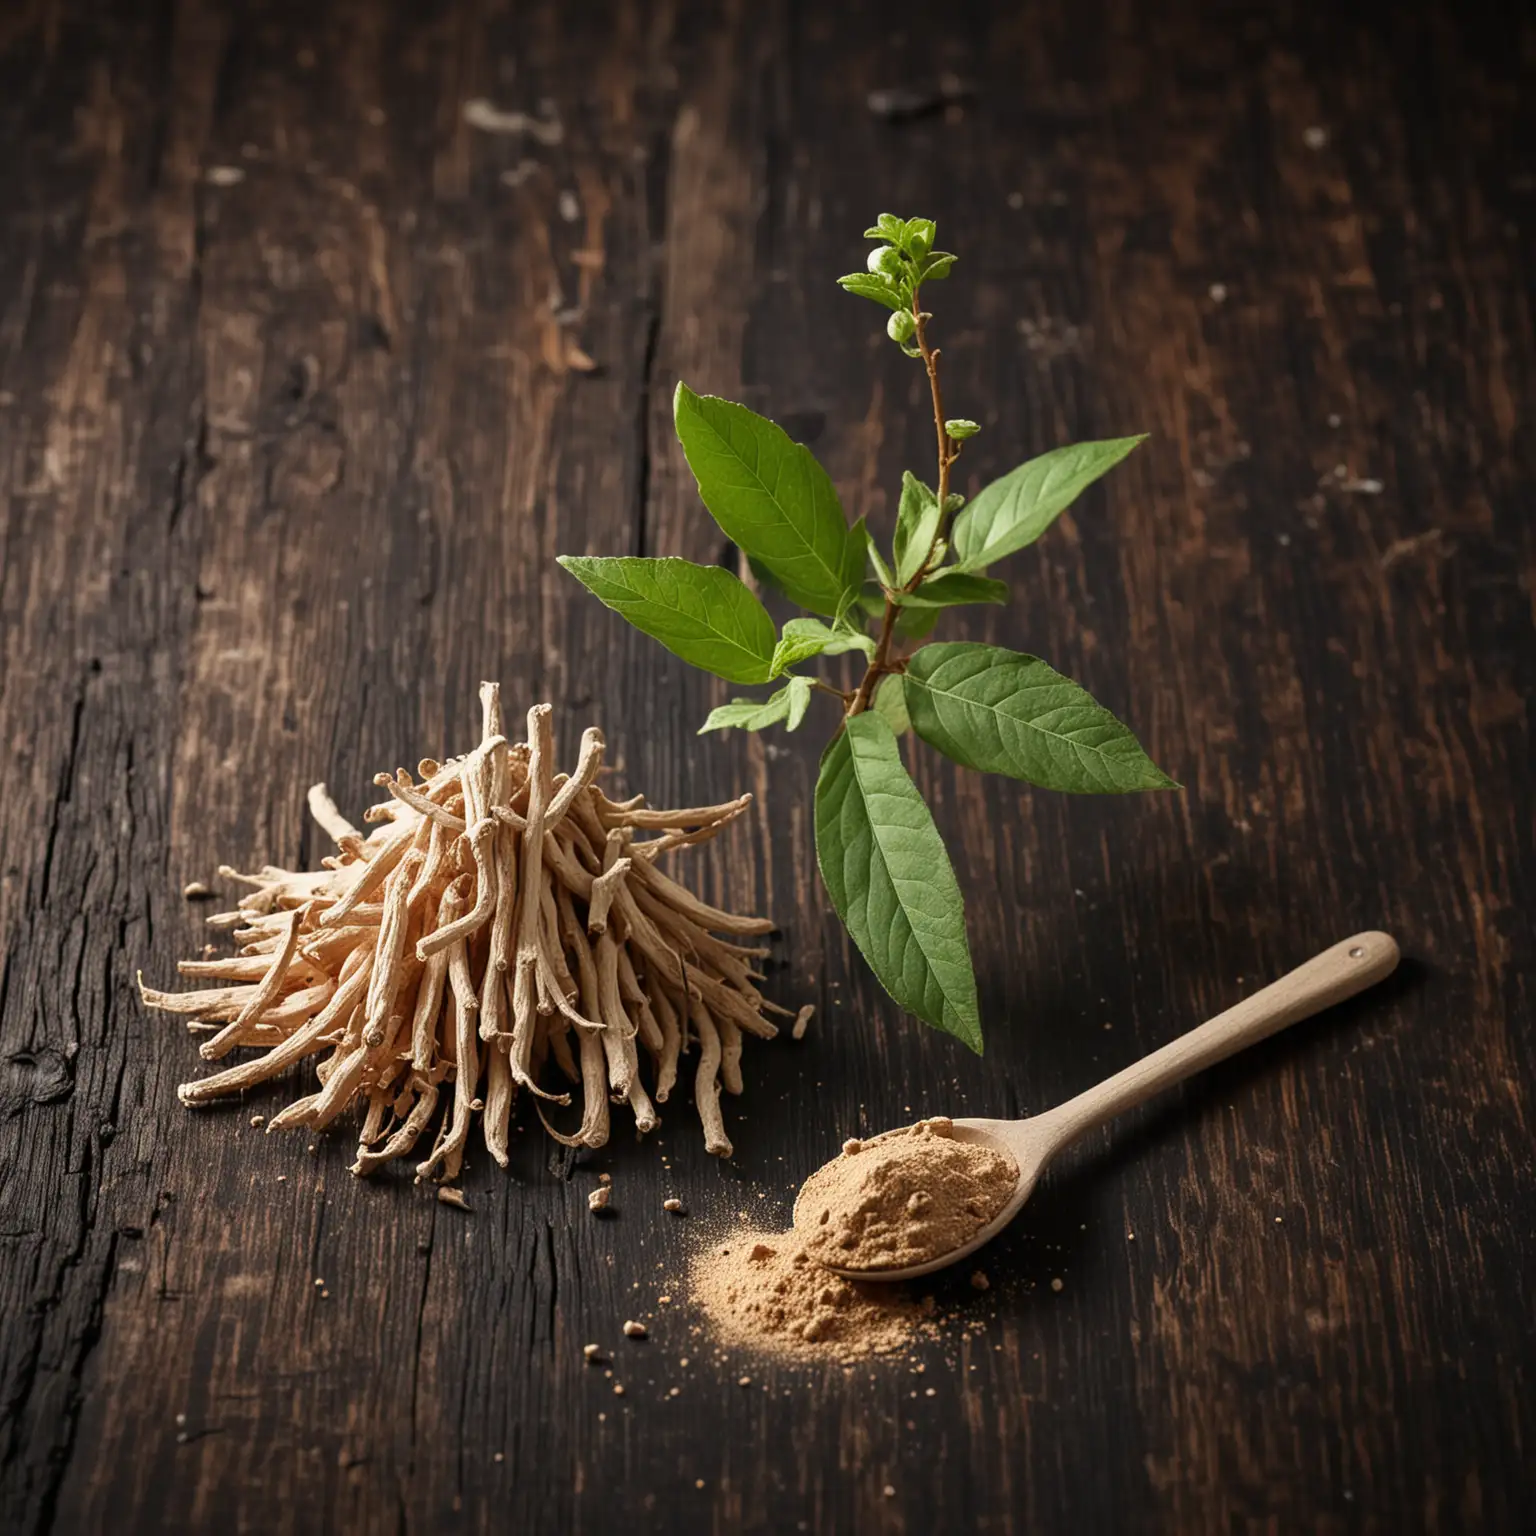 Ashwagandha plant in stem and powder form on dark wooden table with selective focus